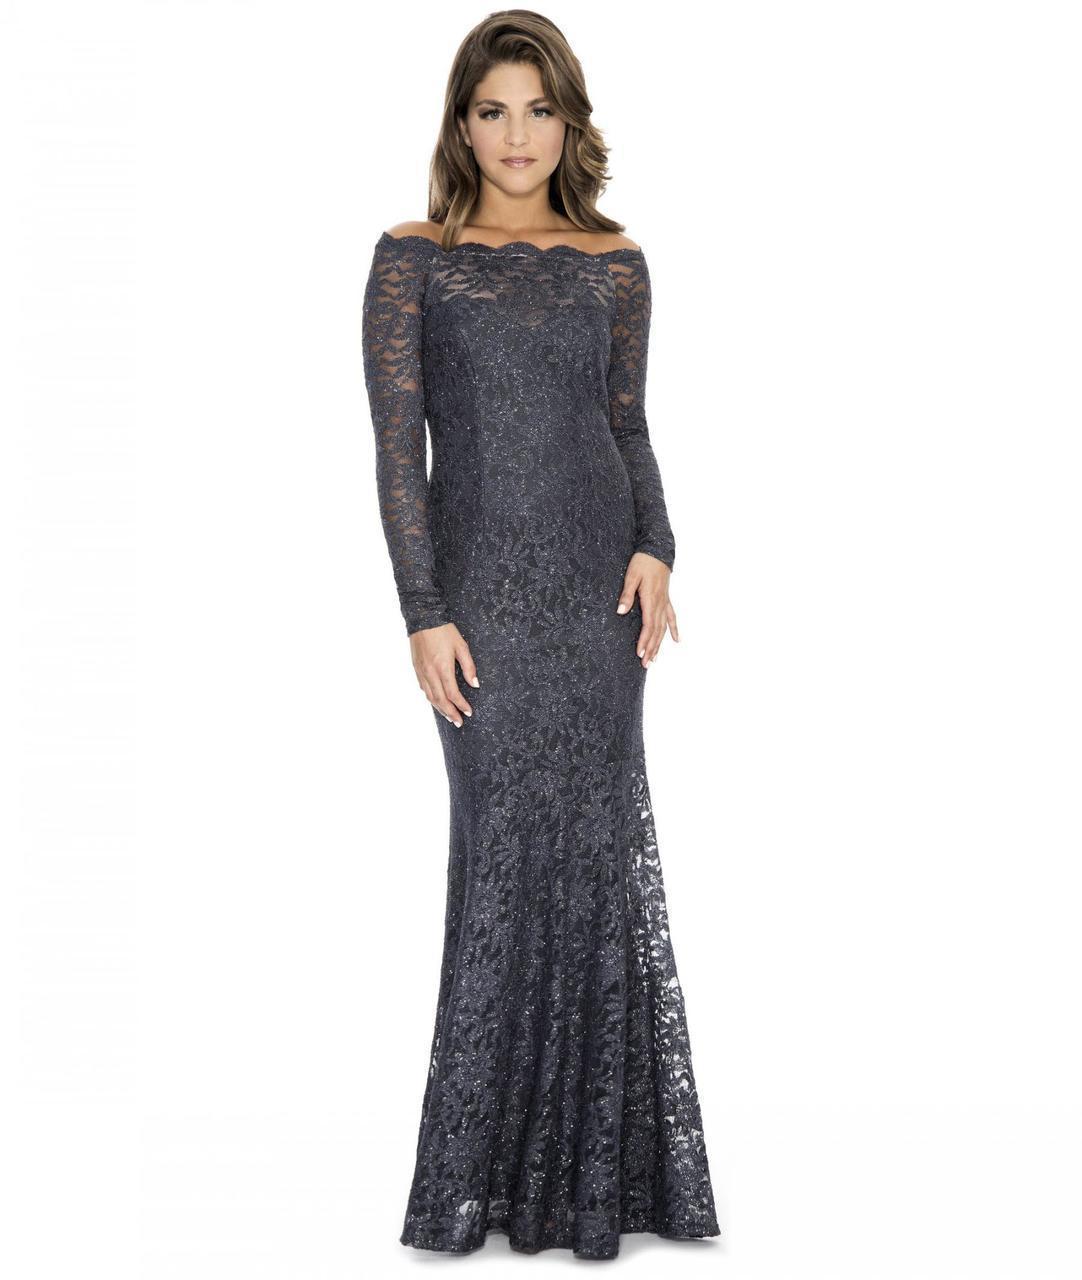 Decode 1.8 - Off-Shoulder Lace Long Dress in Gray